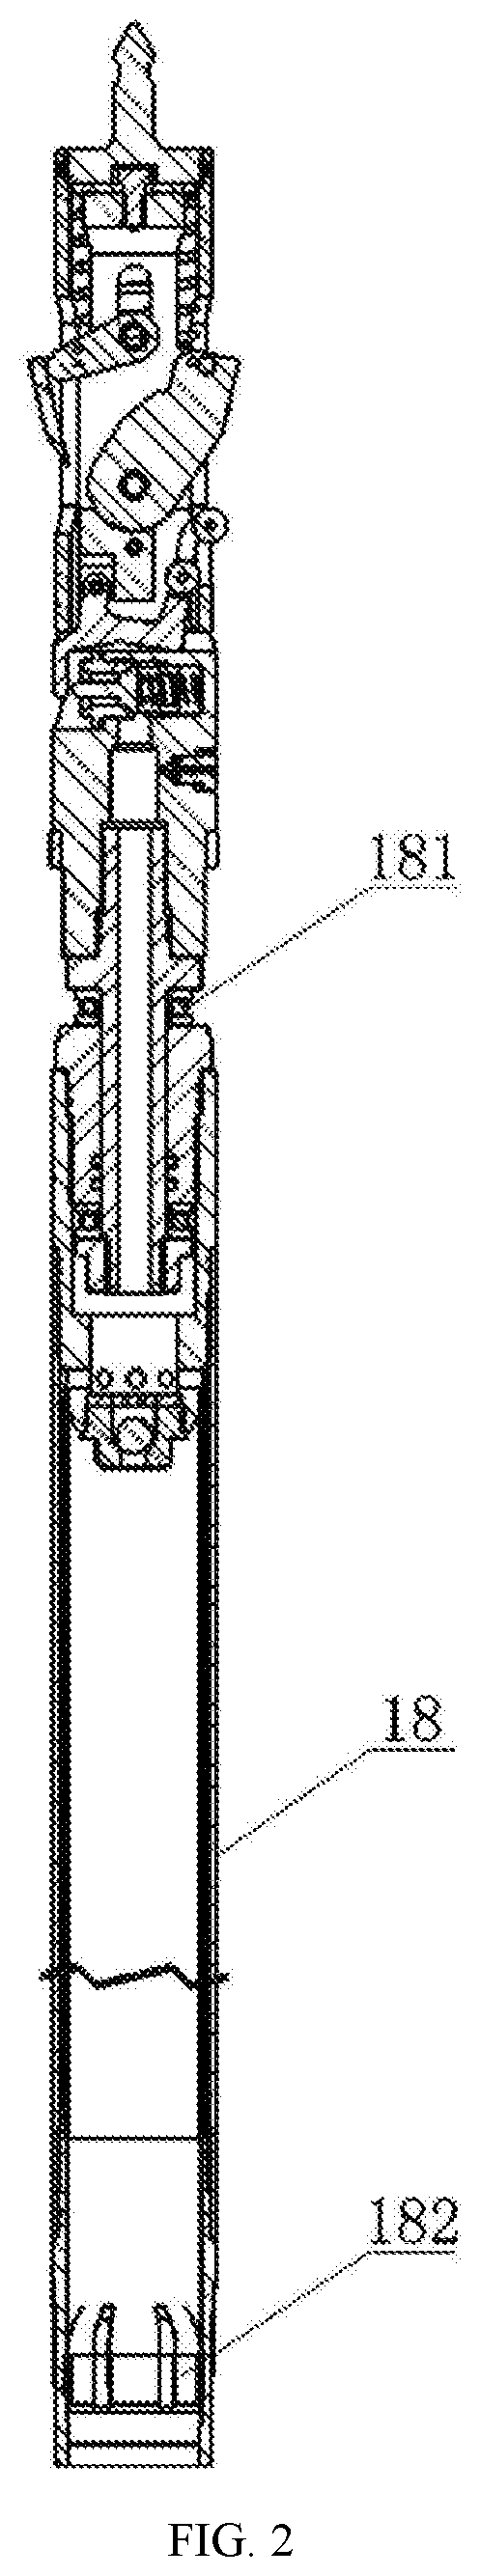 Process for drilling natural gas hydrates with submersible core drilling rig using pressure wireline